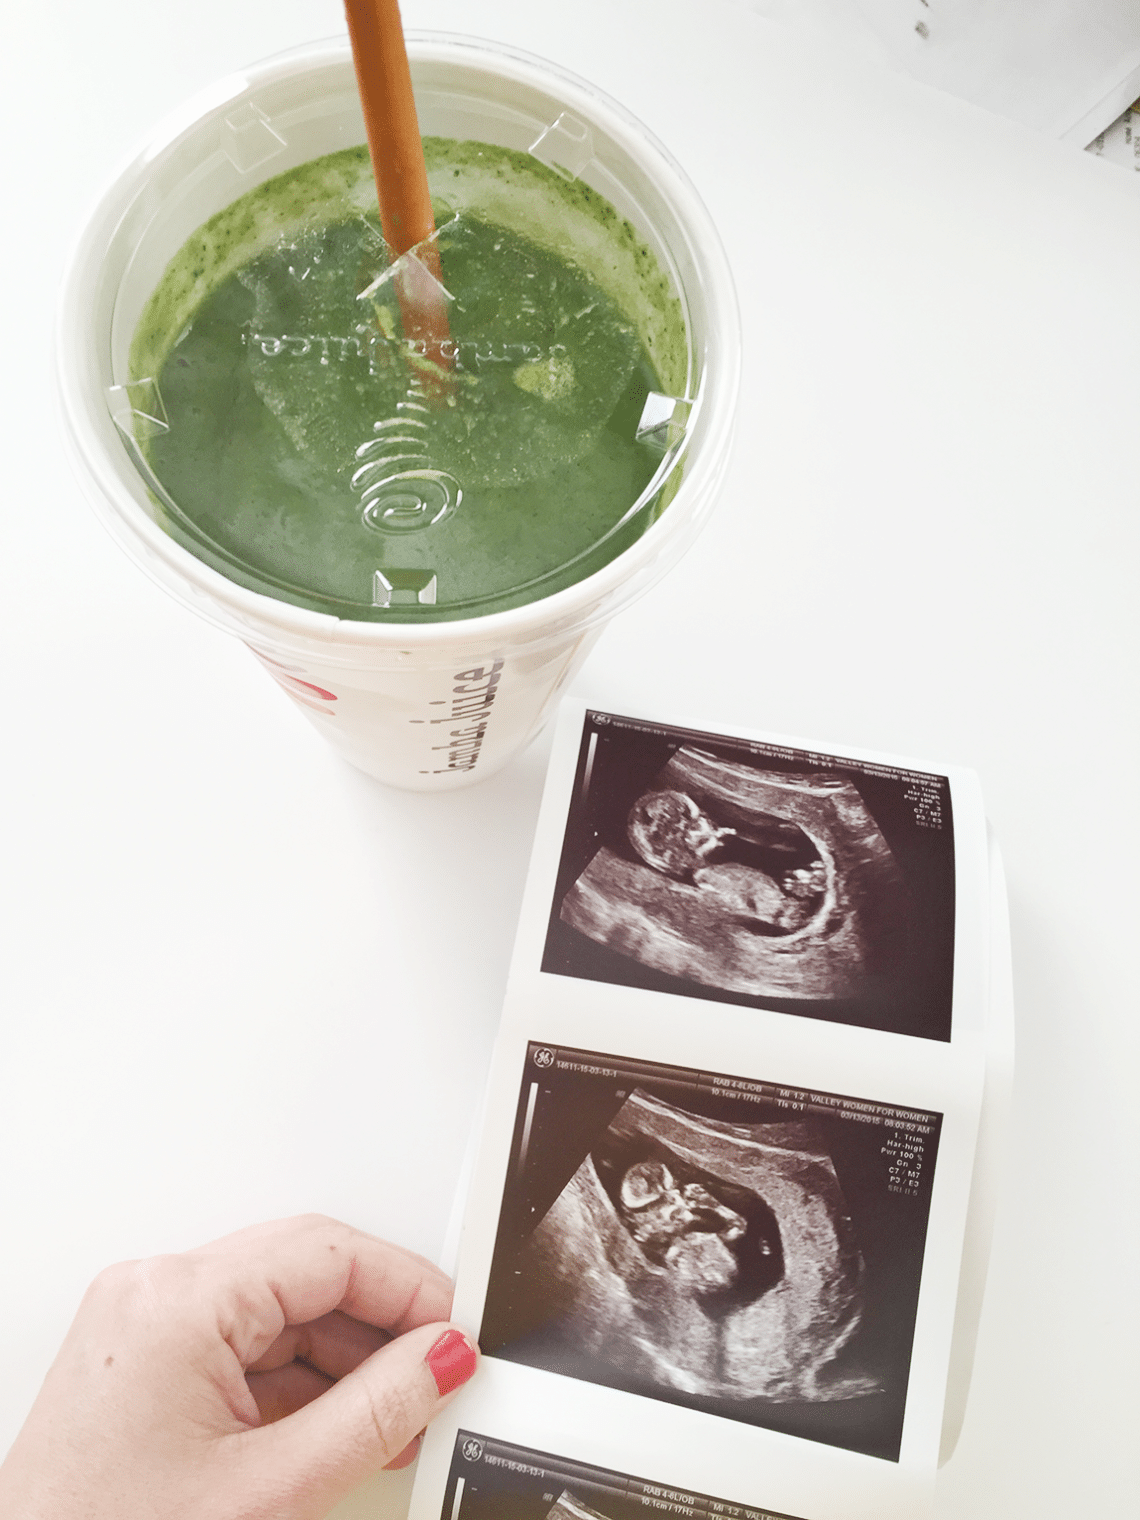 Ultrasound picture next to a green smoothie. 